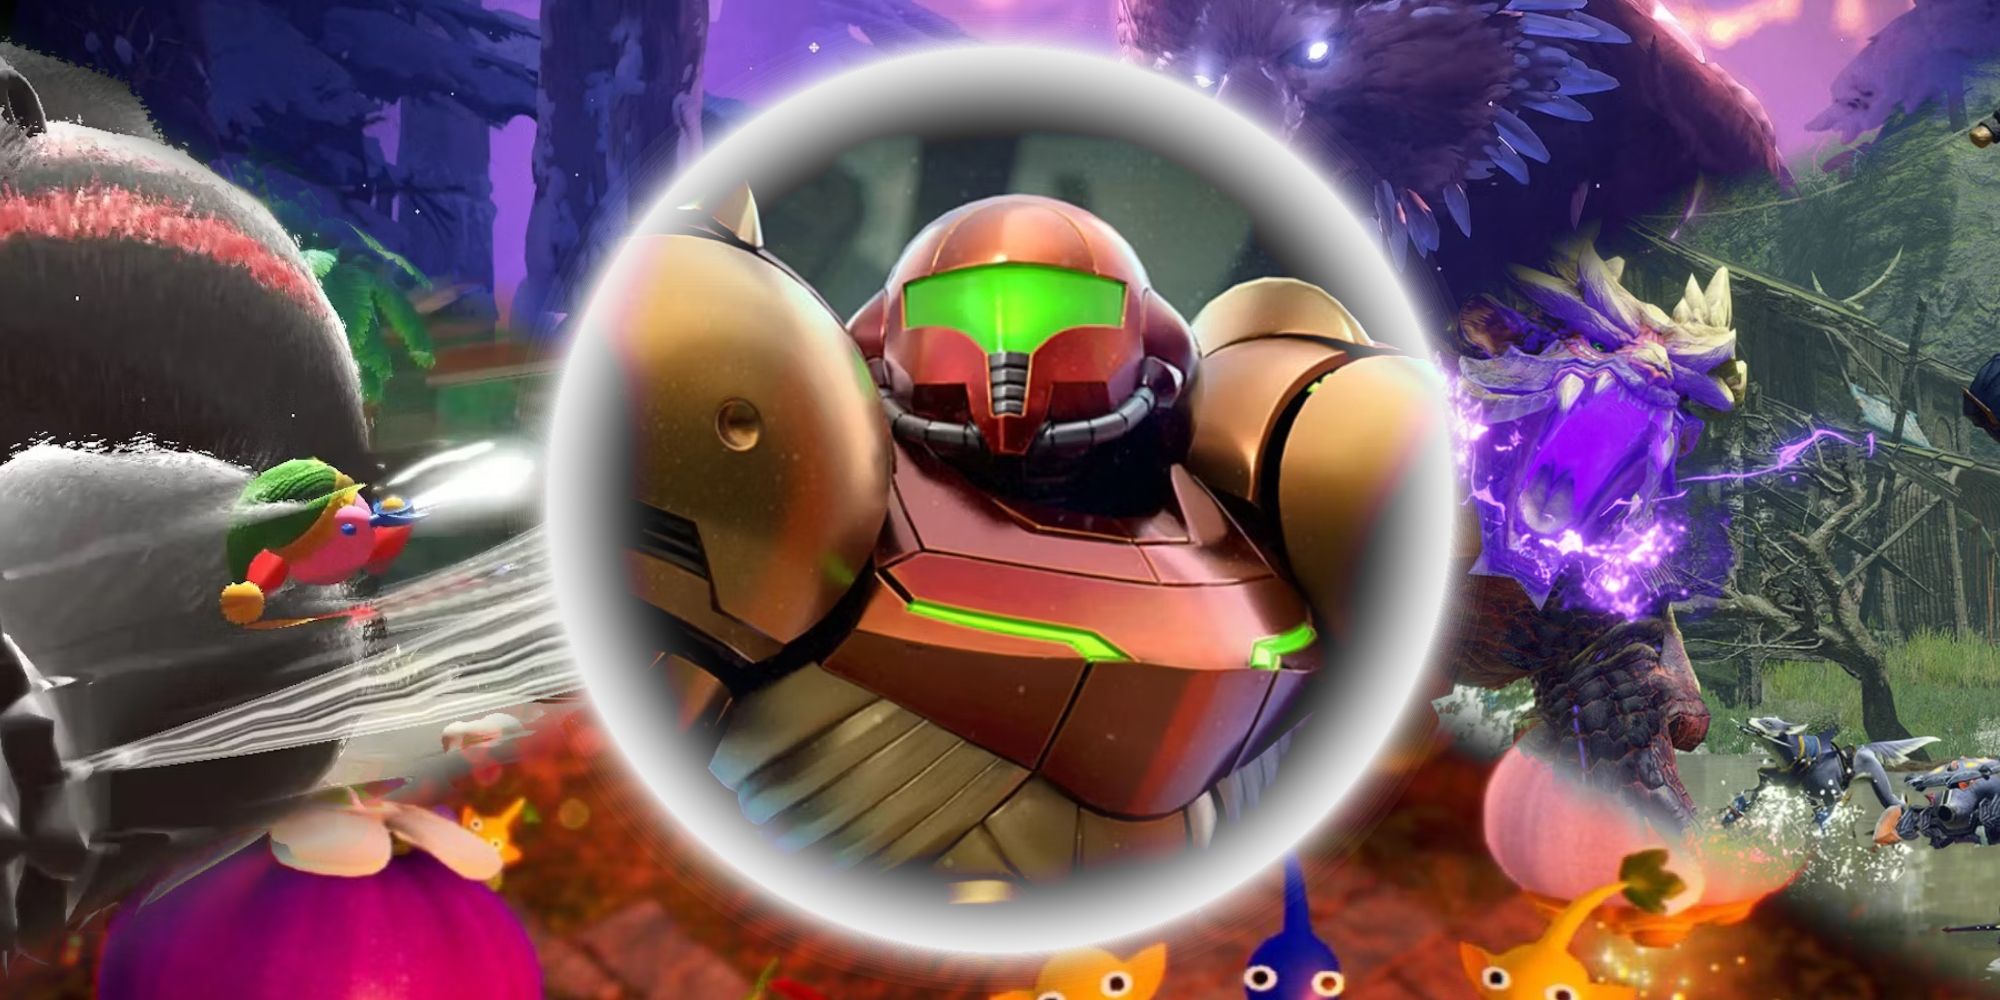 The best action games on the Nintendo Switch, including Metroid, Kirby, Pikmin, Ori, and Monster Hunter